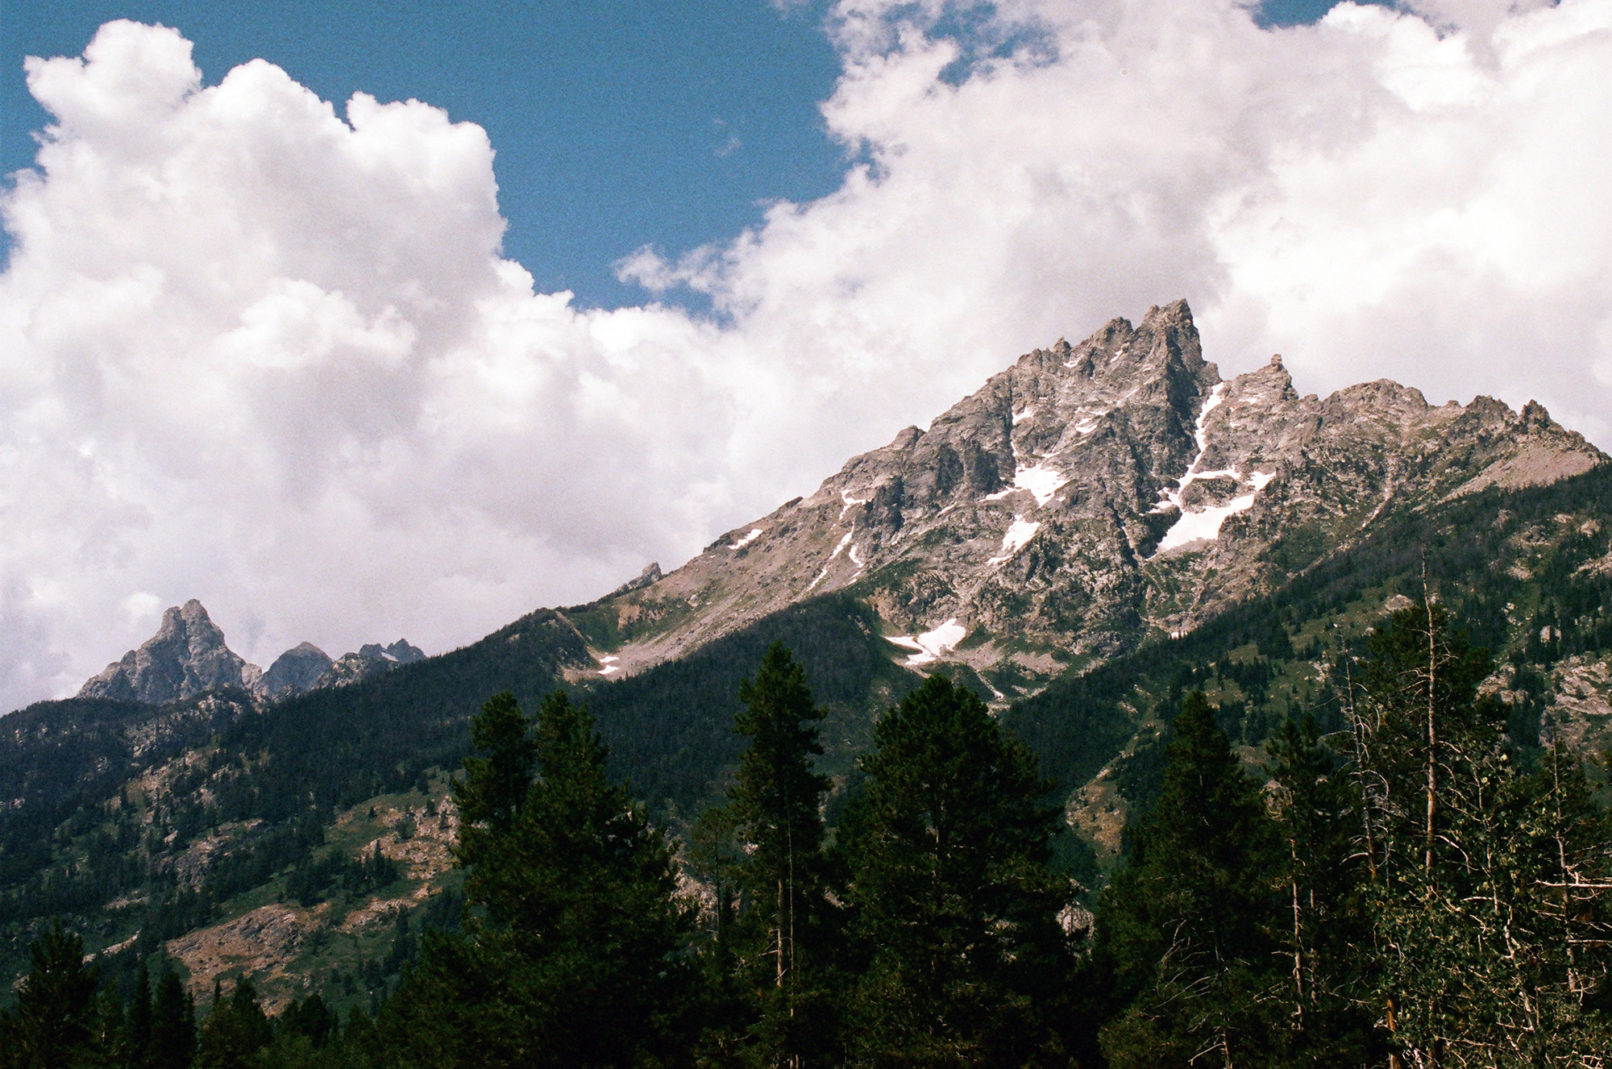 The jagged peaks of the Teton range reaching into the sky.